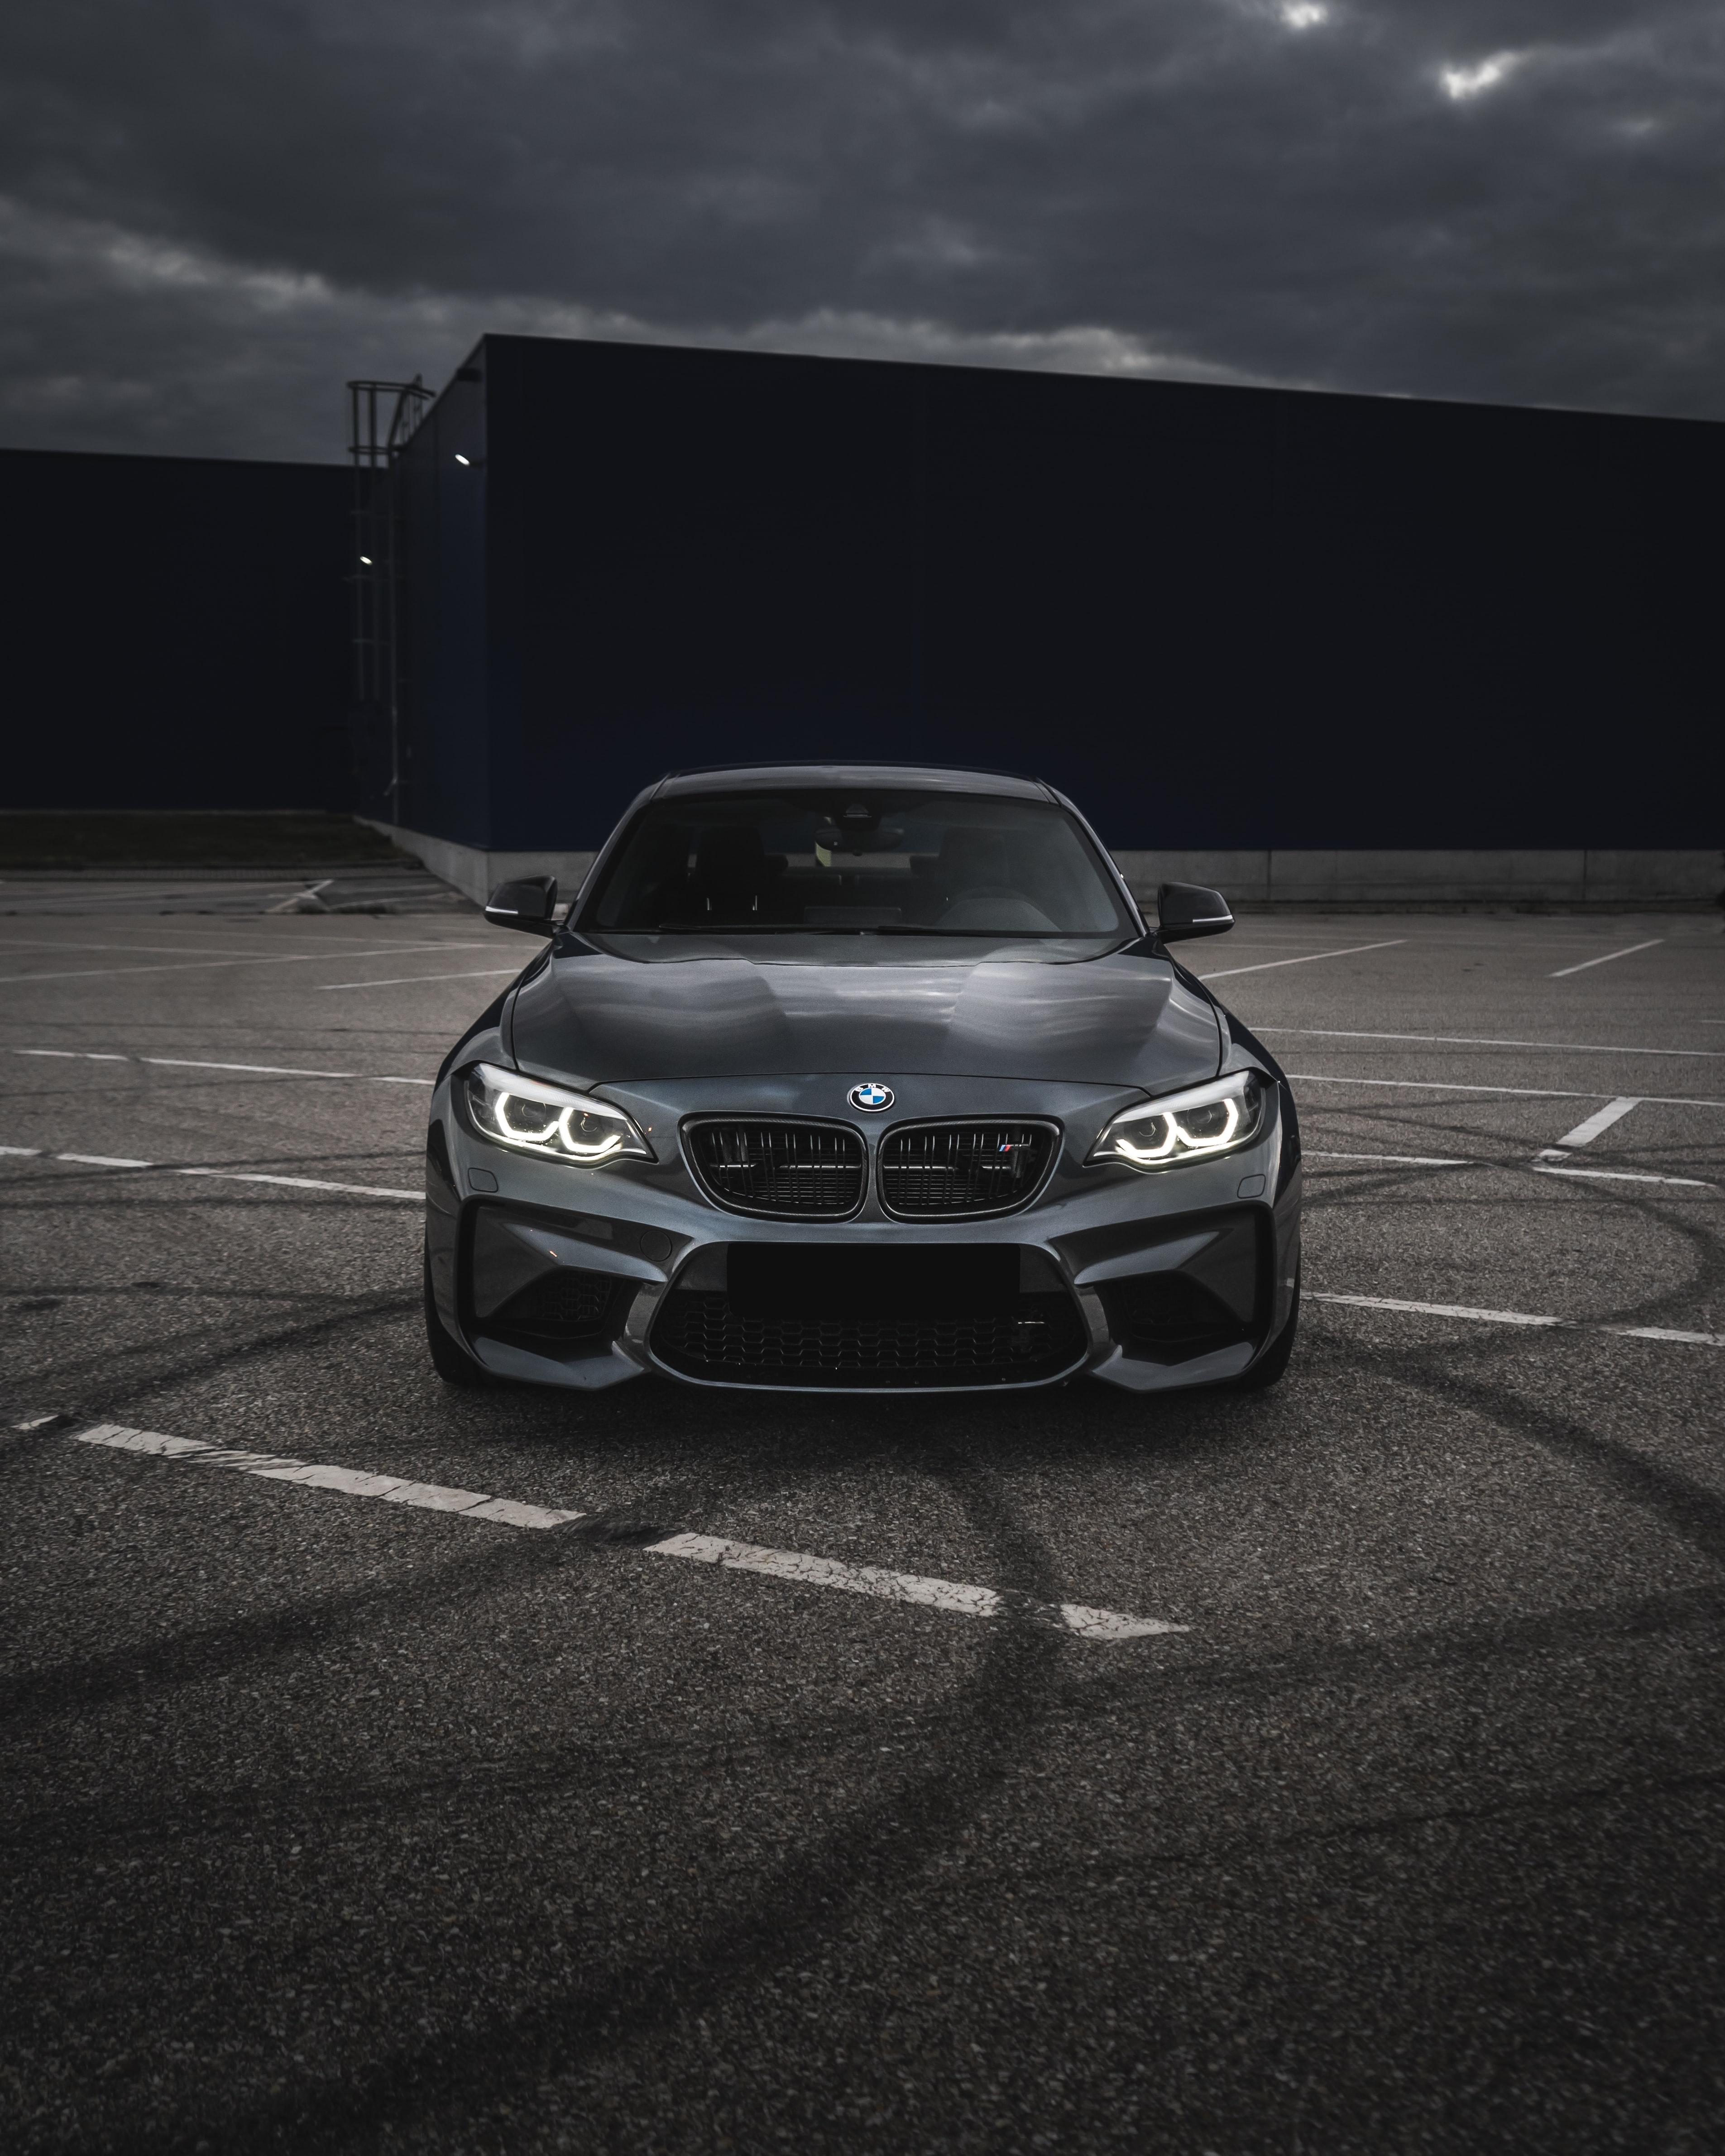 front view, bmw, cars, bmw m3, car, grey High Definition image